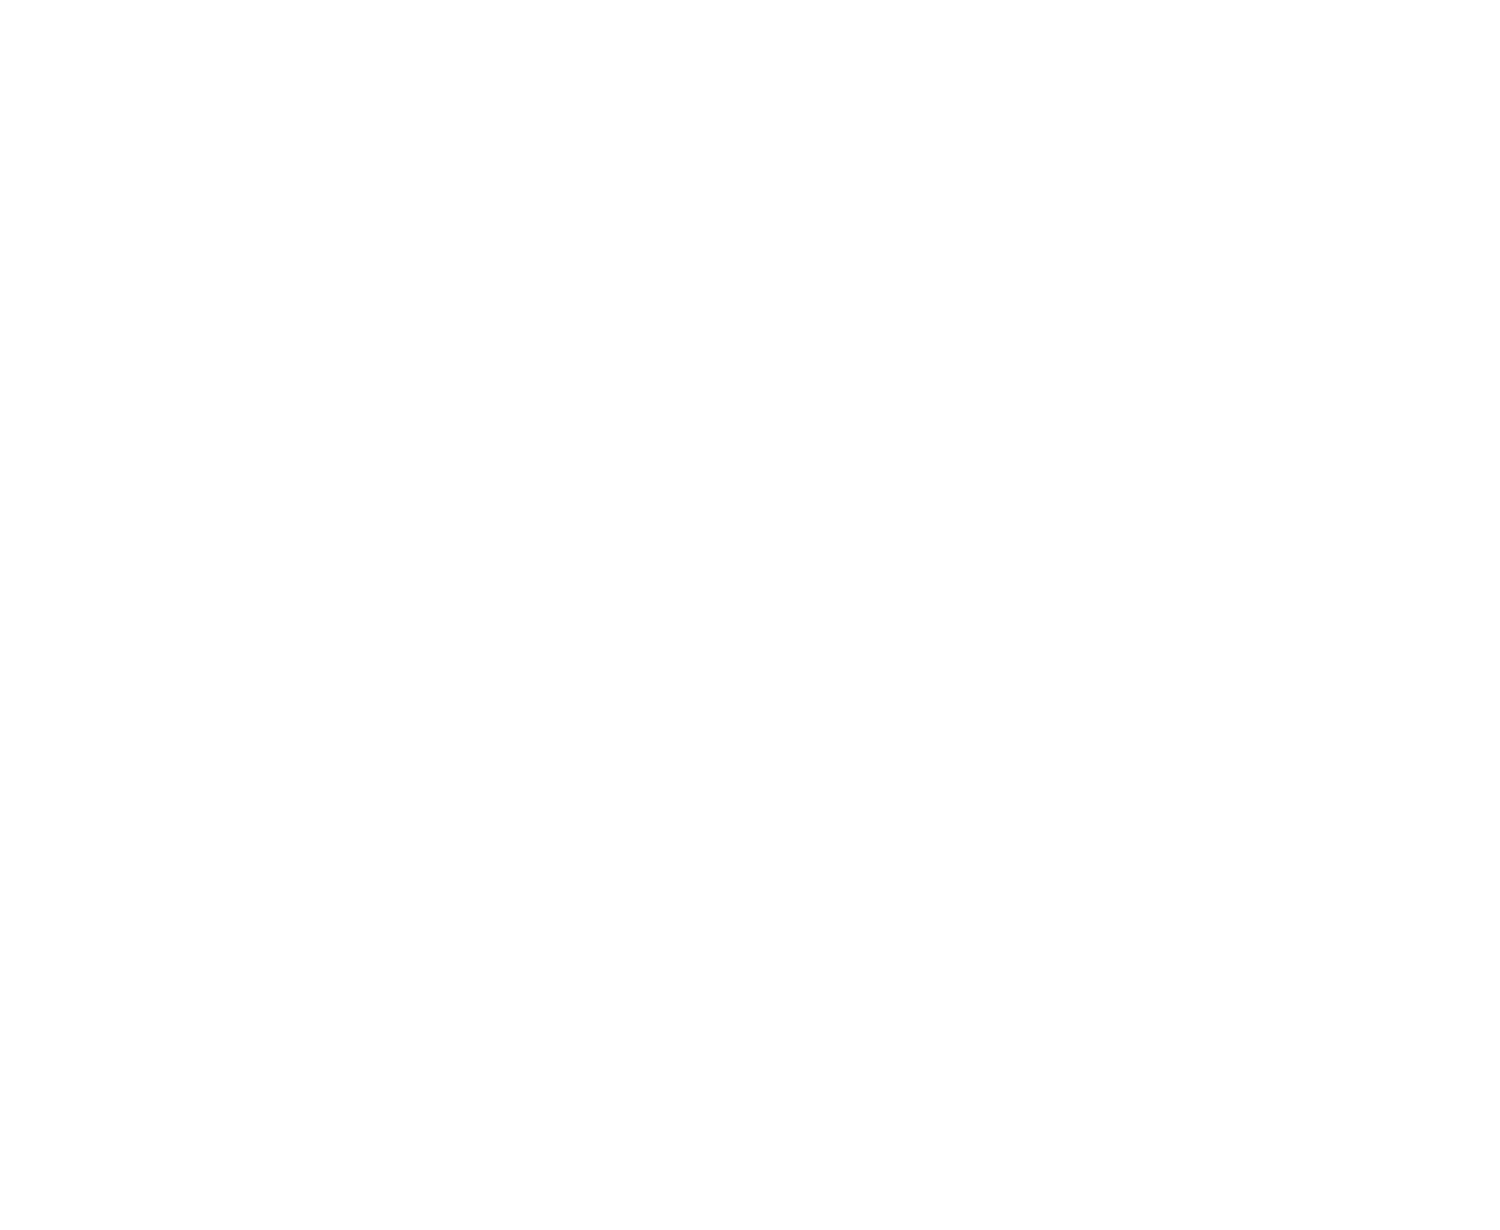 Moore River Holidays - Logo Type - White